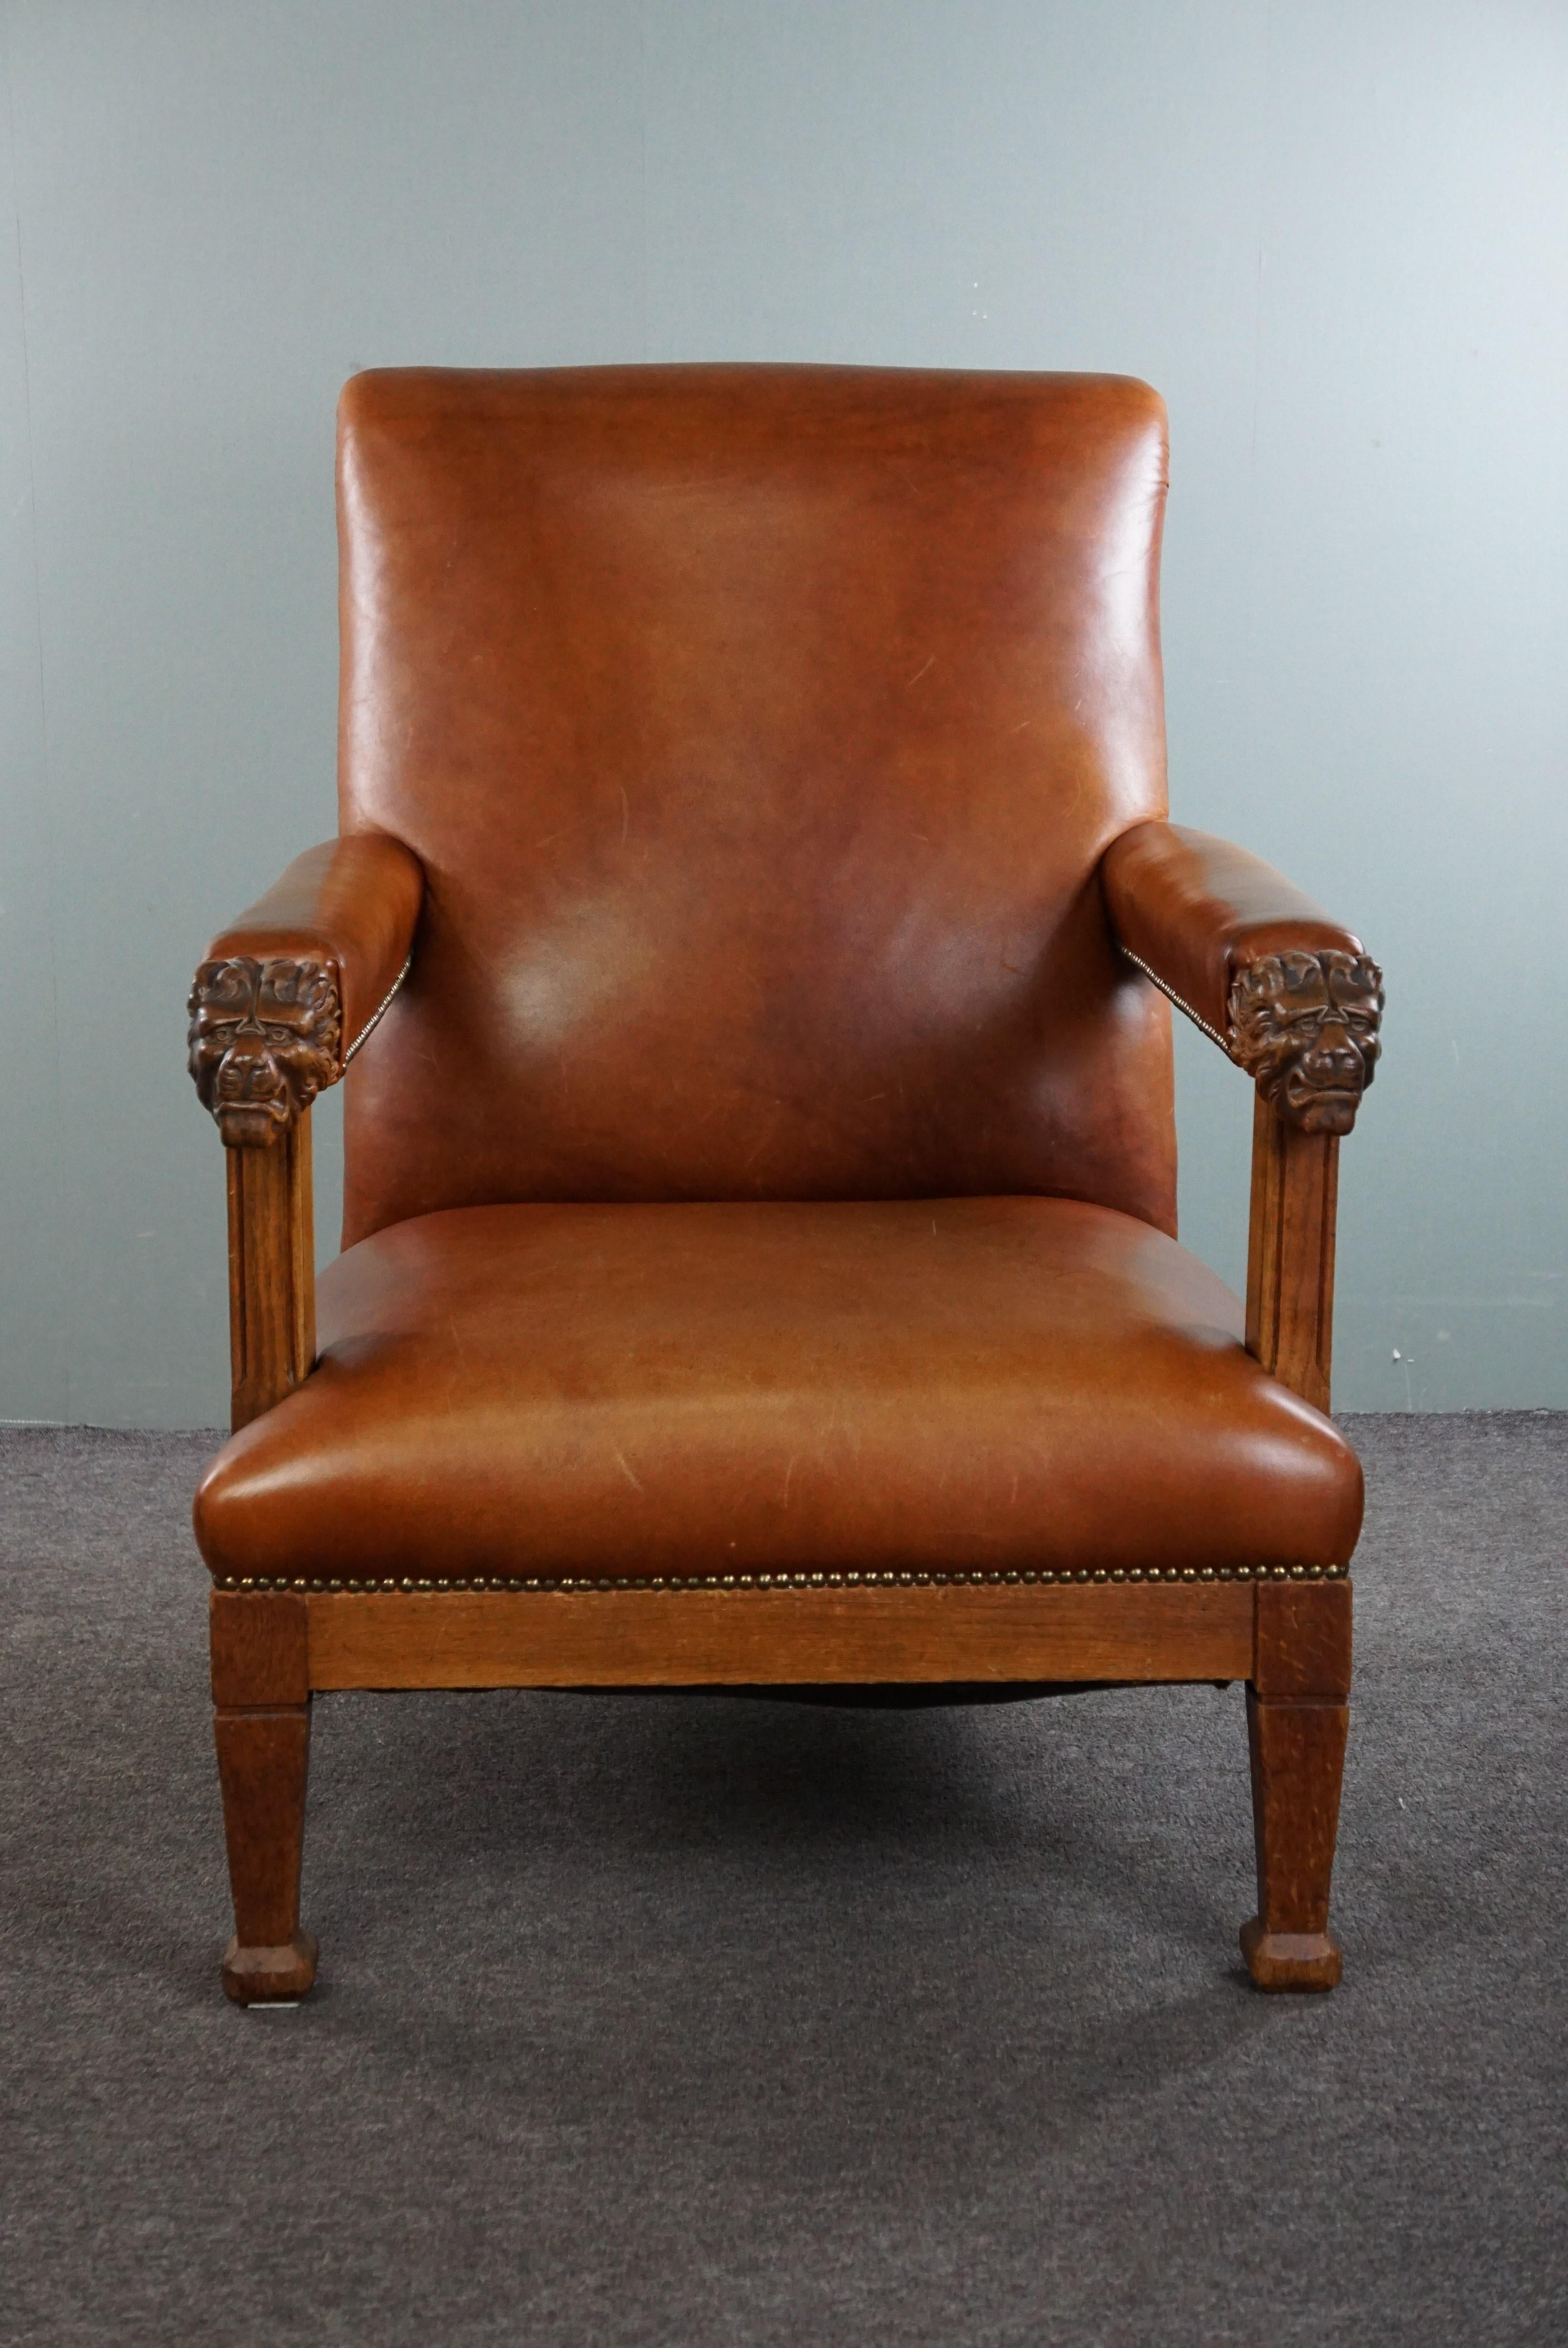 Offered is this stately antique Dutch armchair adorned with lion heads, which has been reupholstered in cognac-colored cowhide and finished with decorative nails.

Can you already imagine this armchair in your interior? It wouldn't surprise us if it